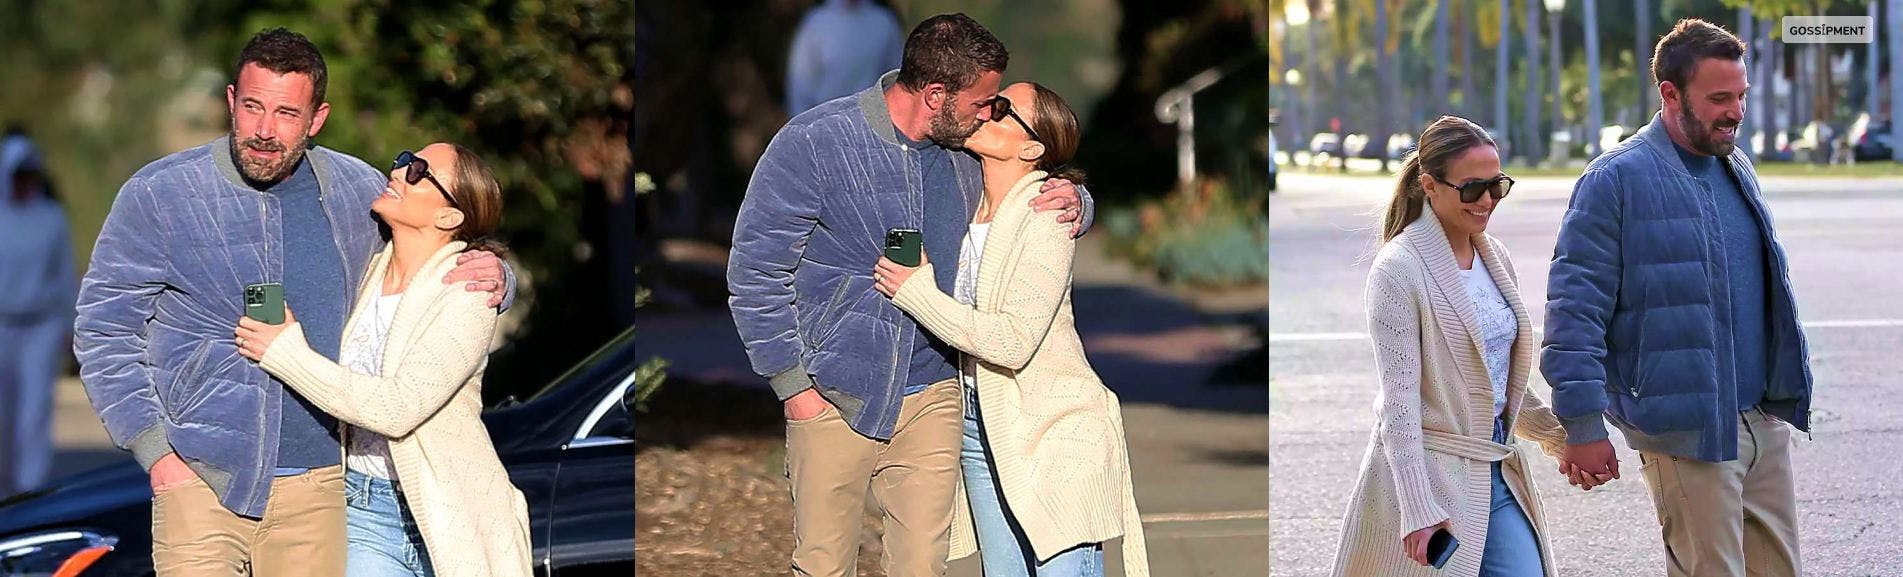 Cover Image for Ben Affleck And Jennifer Lopez, Photographed In A Love-filled Moment, Sharing A Kiss